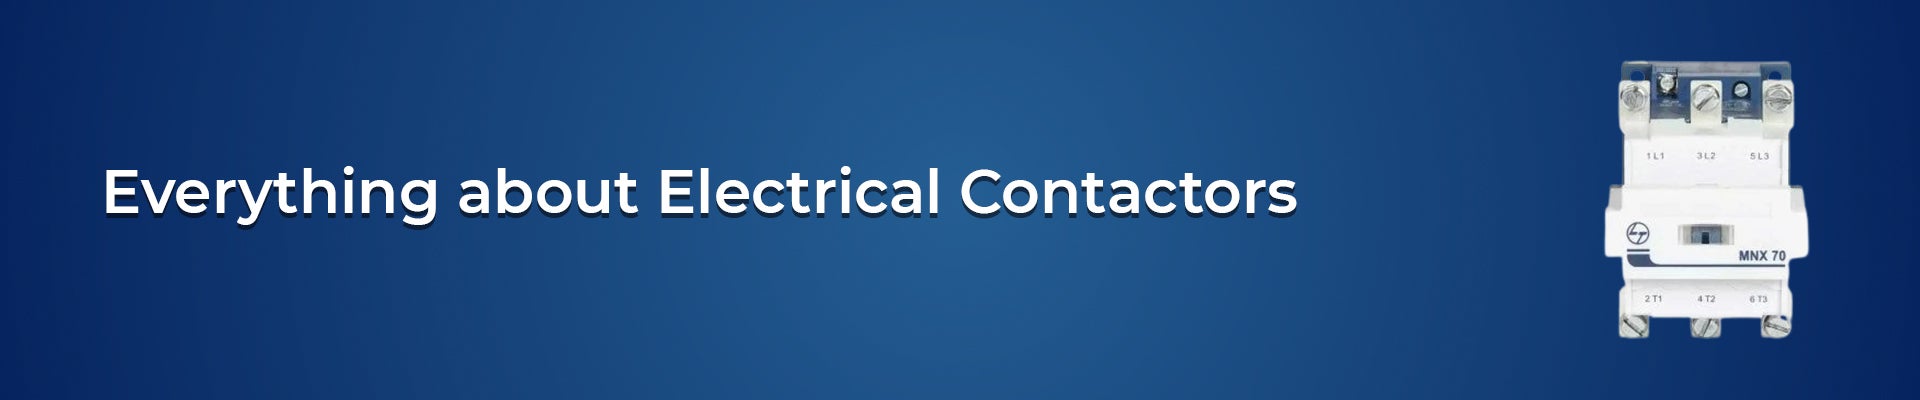 Everything you need to know about Electrical Contactors